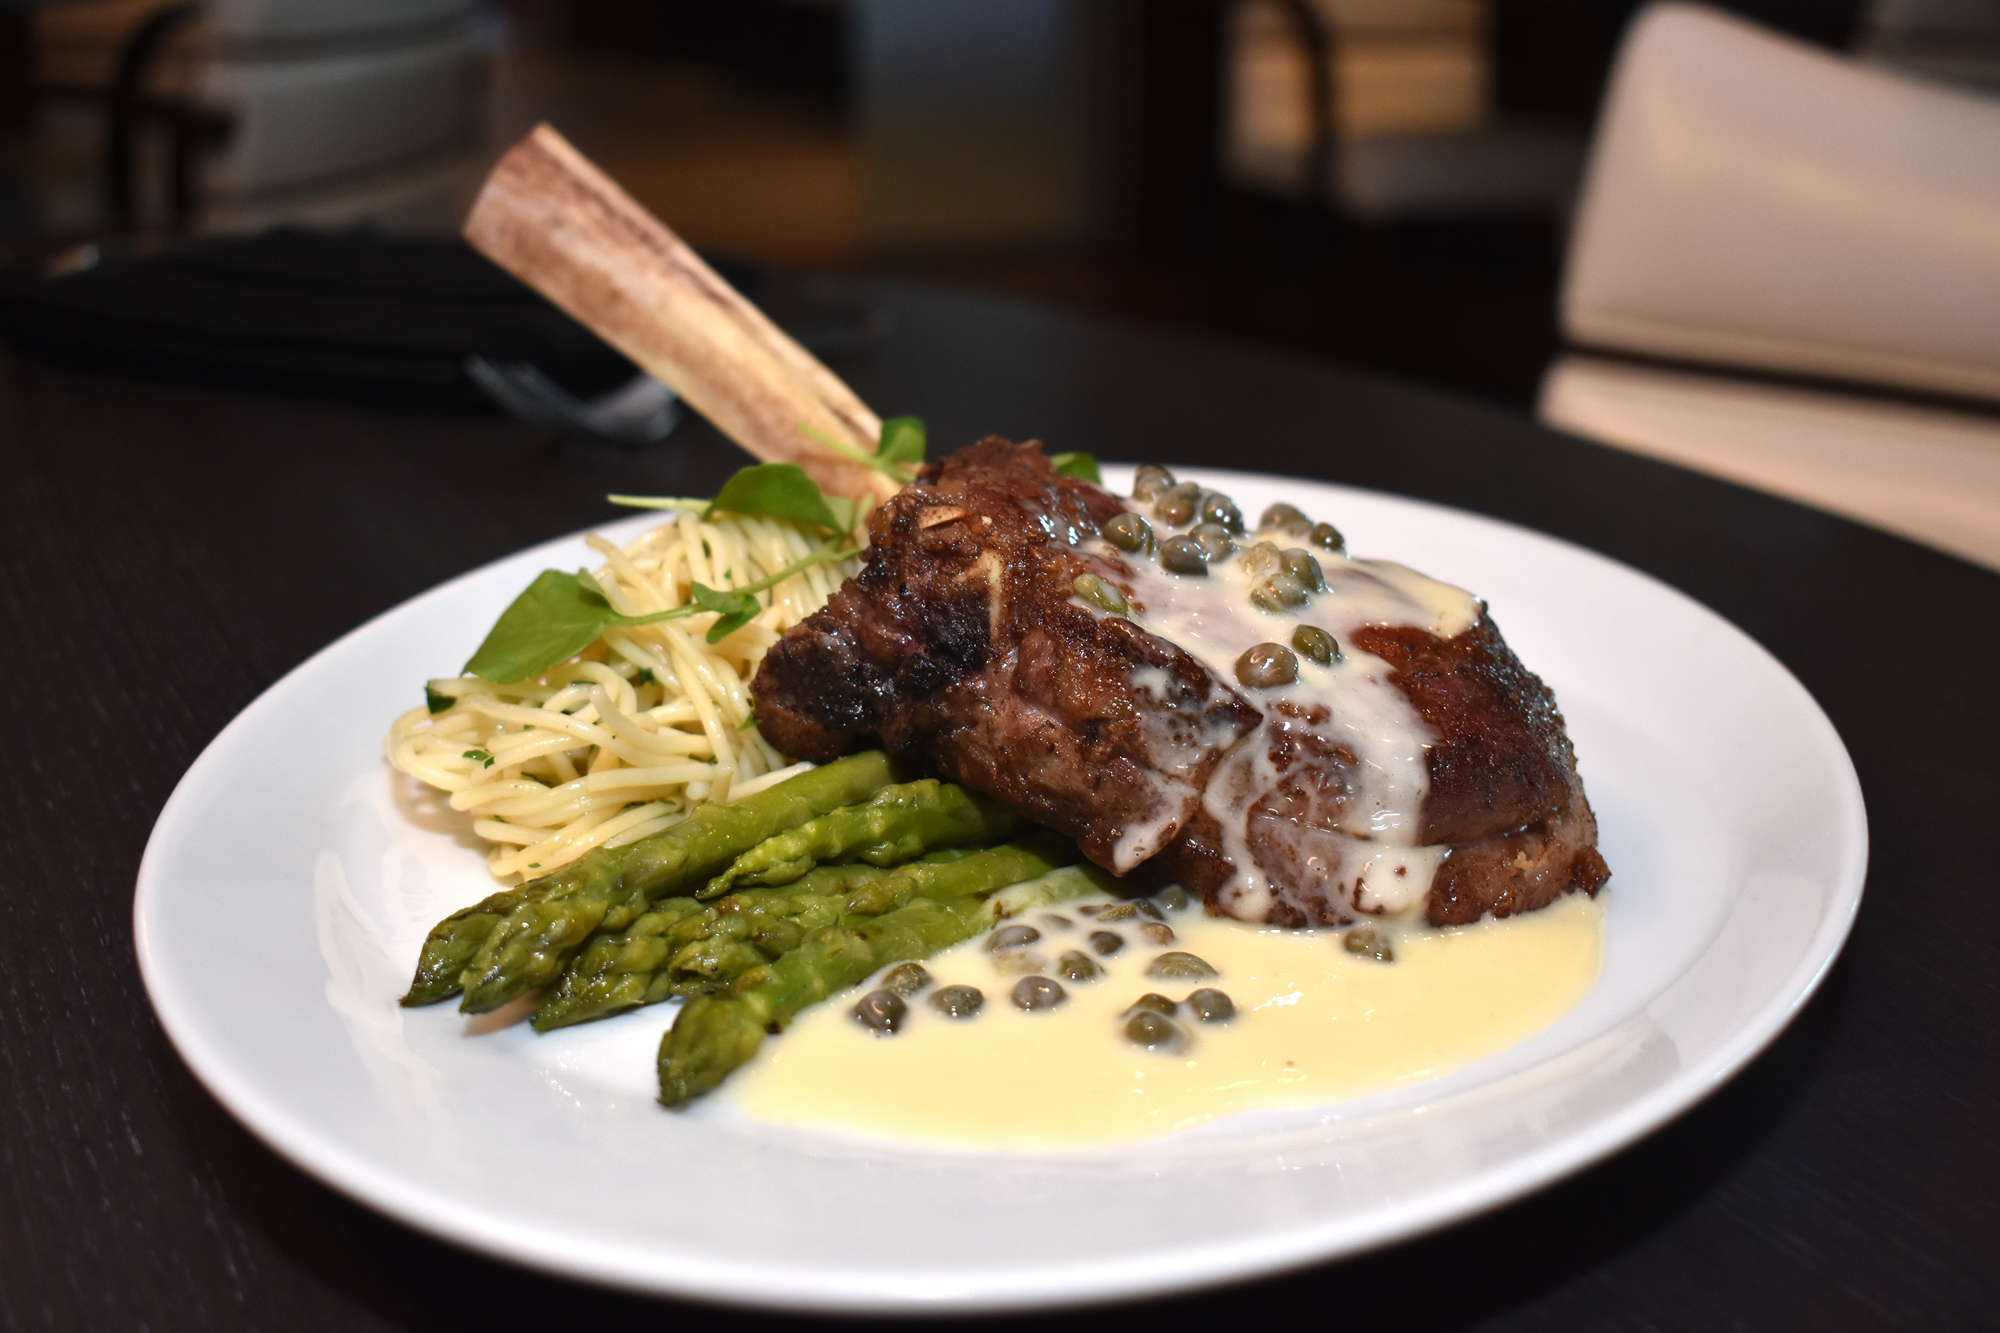 Viento Kitchen and Bar will serve a veal piccata dish as a Valentine's Day special.